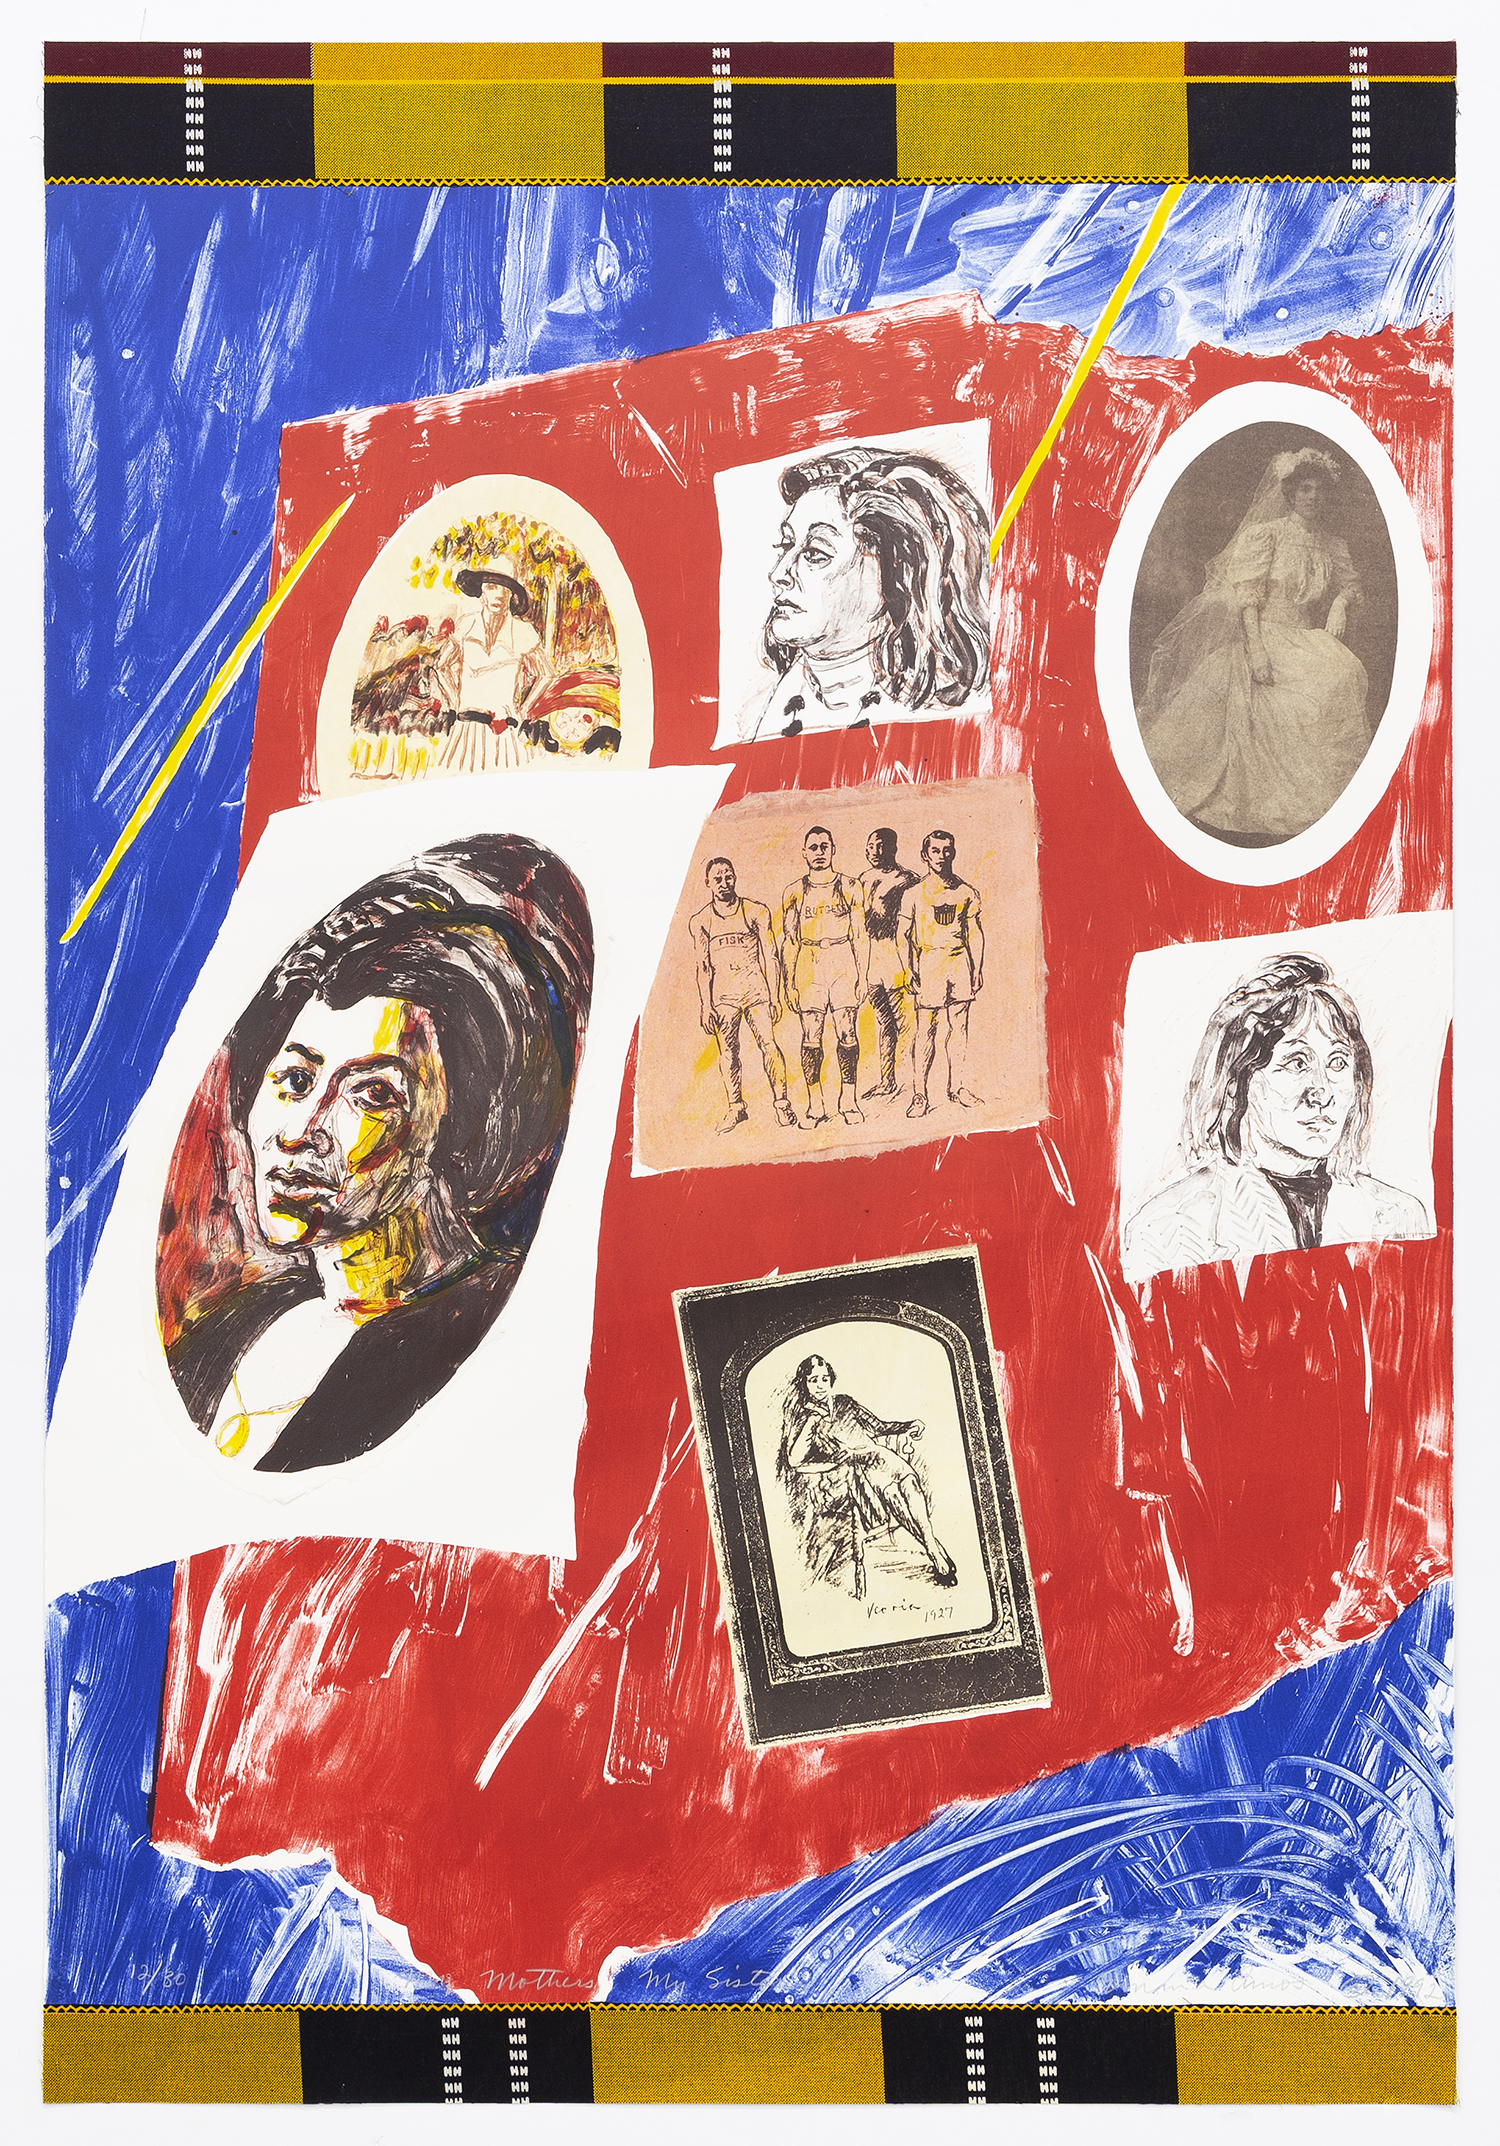 a print collage with drawings and photos of women